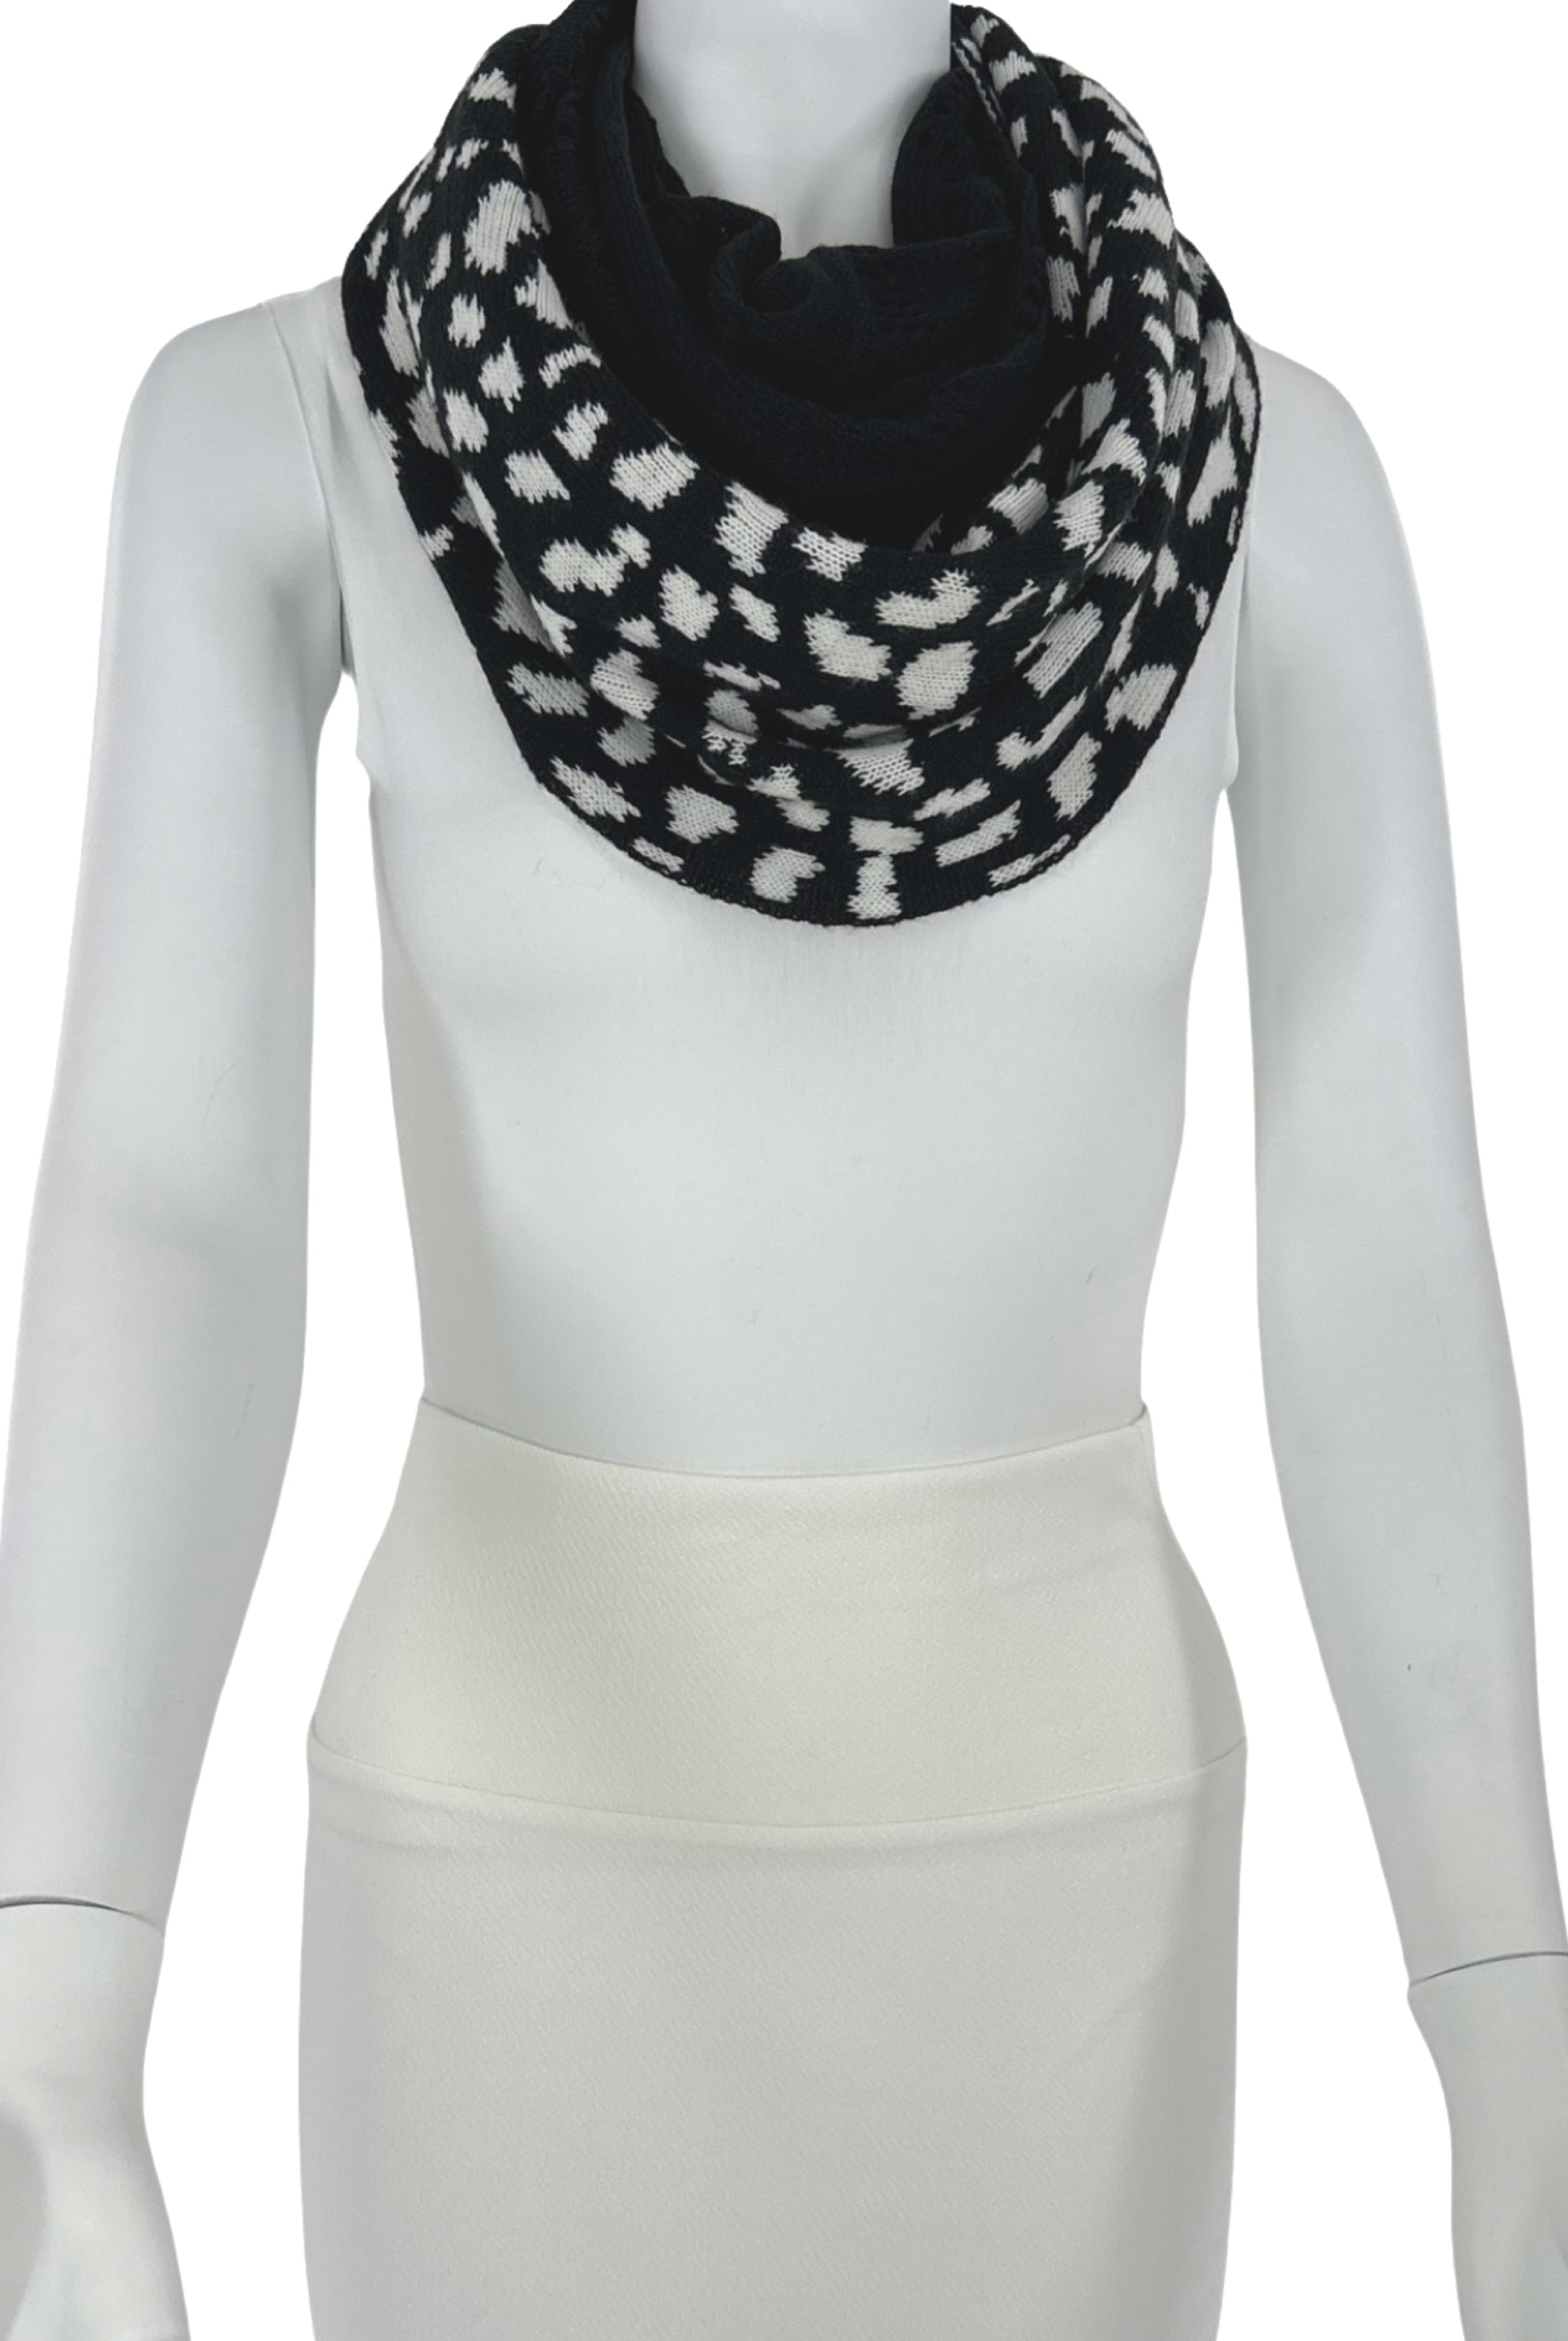 Hand-Woven Black and White Infinity Scarf 